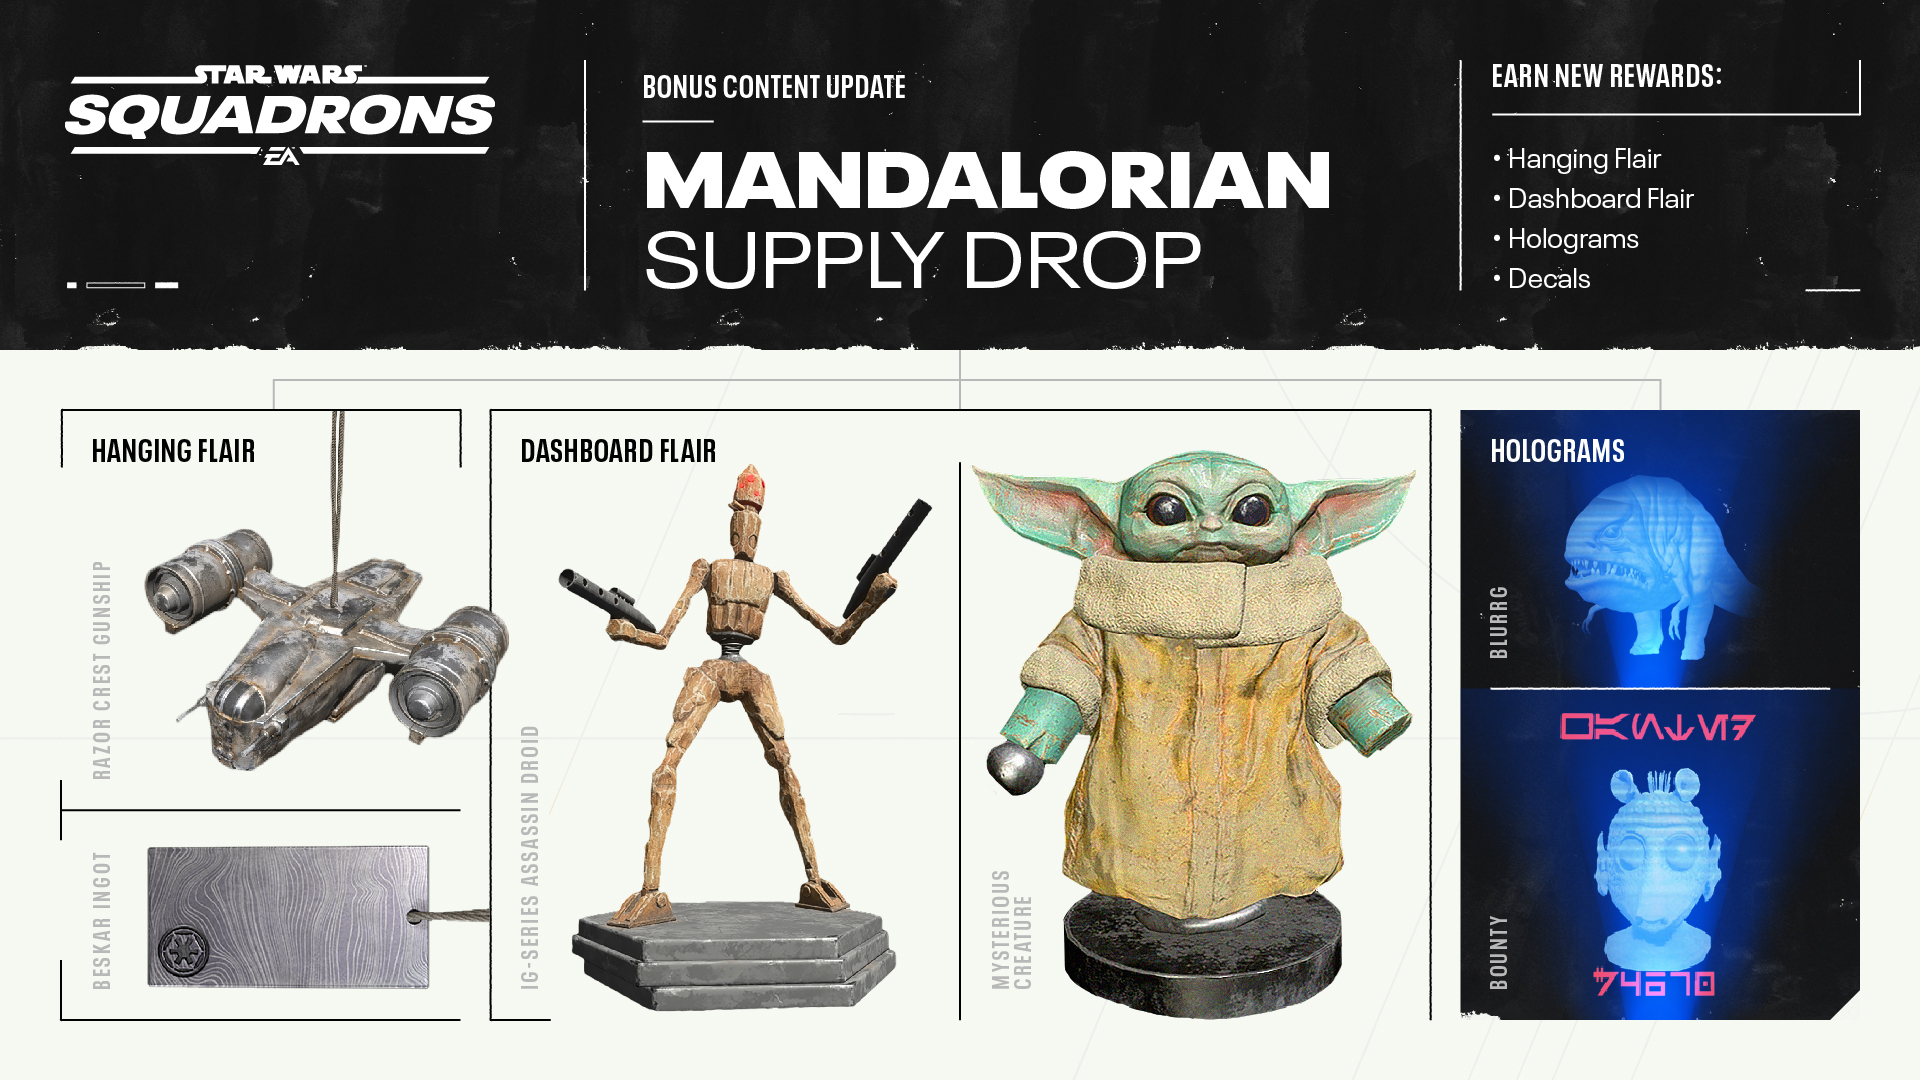 Star Wars: Squadrons' The Mandalorian Supply Drop update, featuring a tiny Baby Yoda